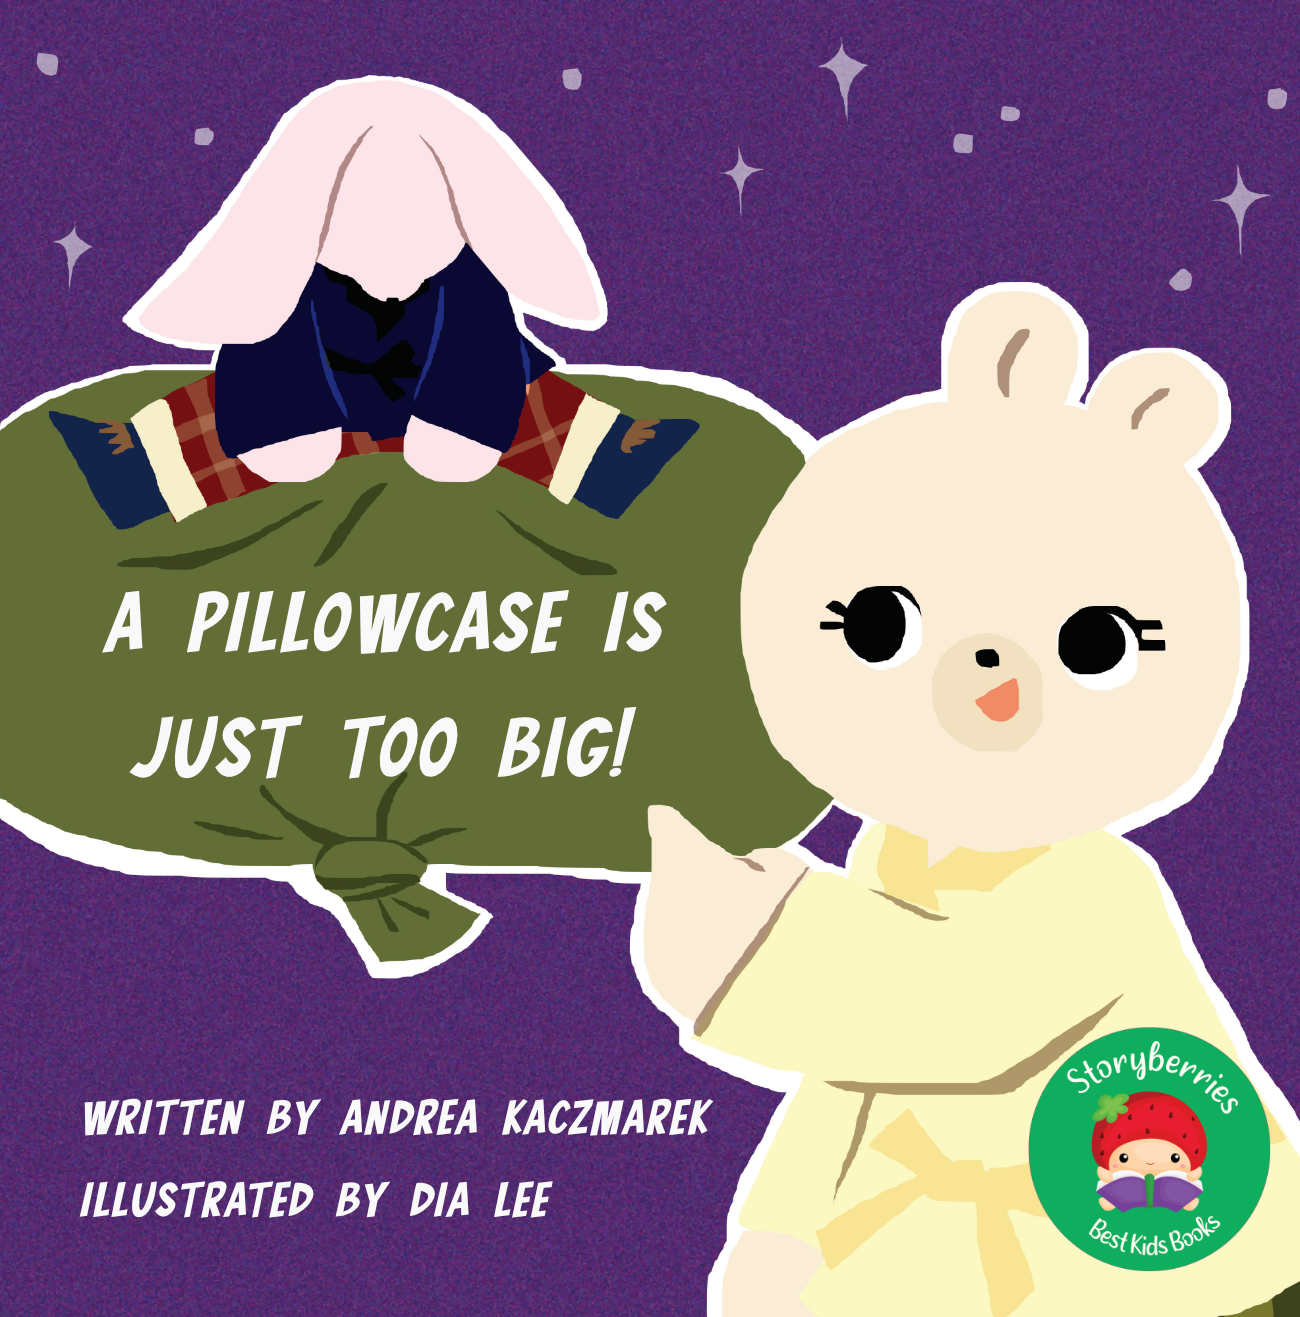 Bedtime Stories for Xmas A Pillowcase Is Just Too Big short Christmas stories for kids cover